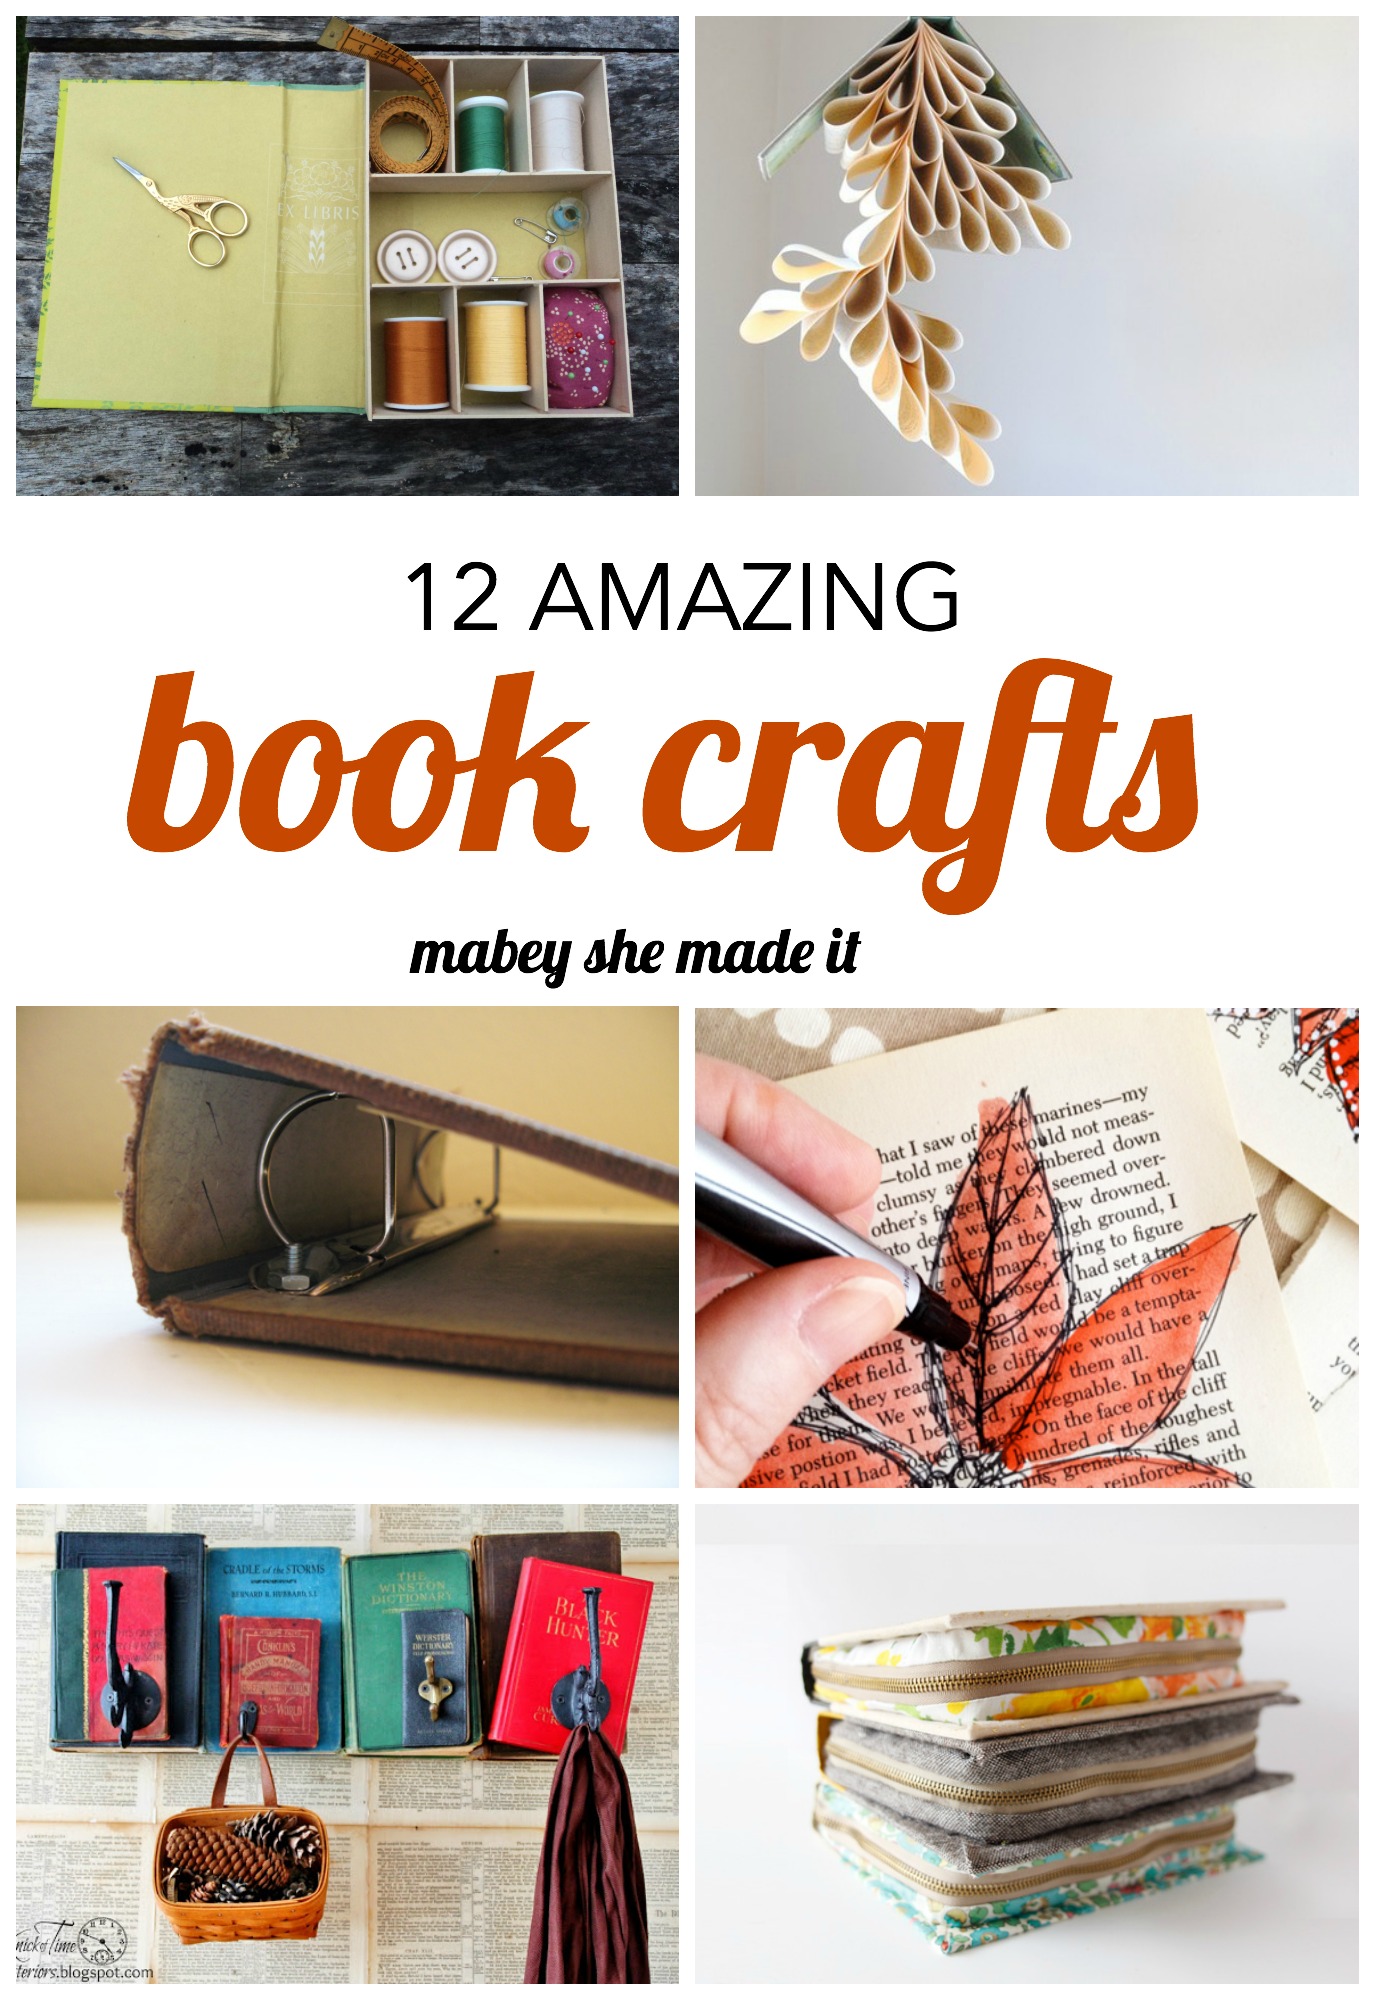 Favorite Craft Books for Kids, Old and New